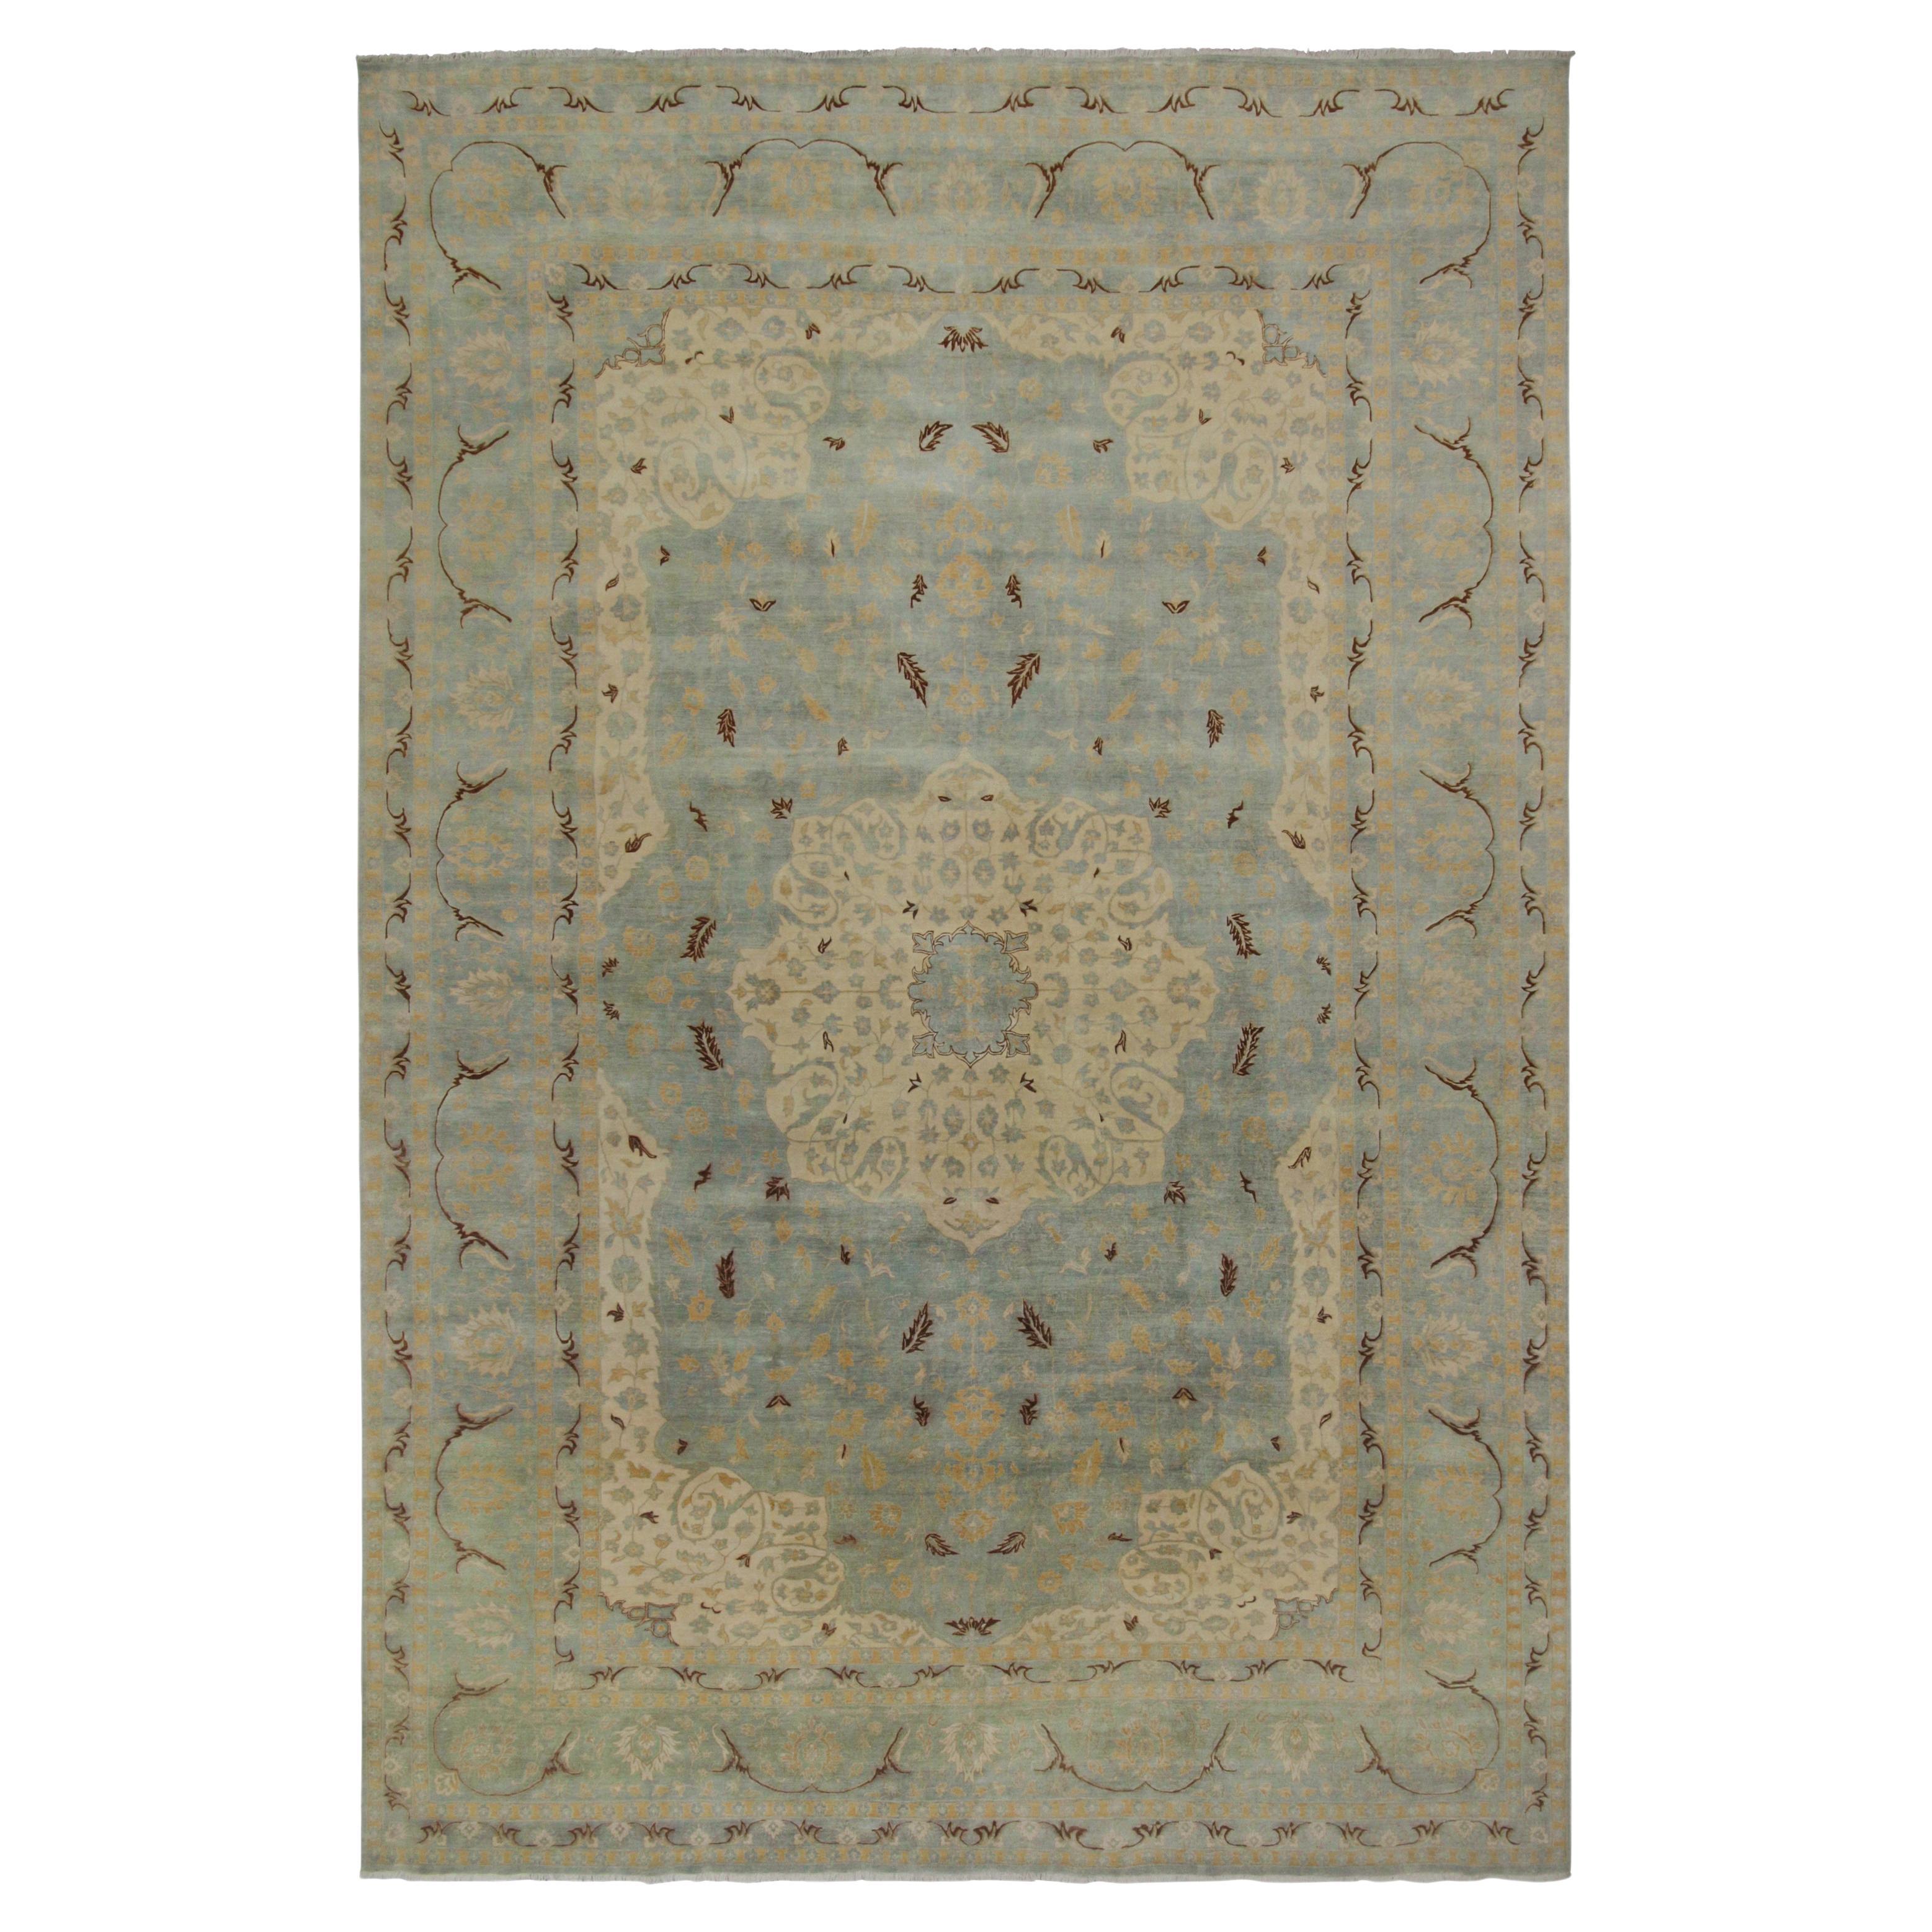 Rug & Kilim’s Persian Style Rug in Blue, Beige-Brown and Gold Floral Pattern For Sale